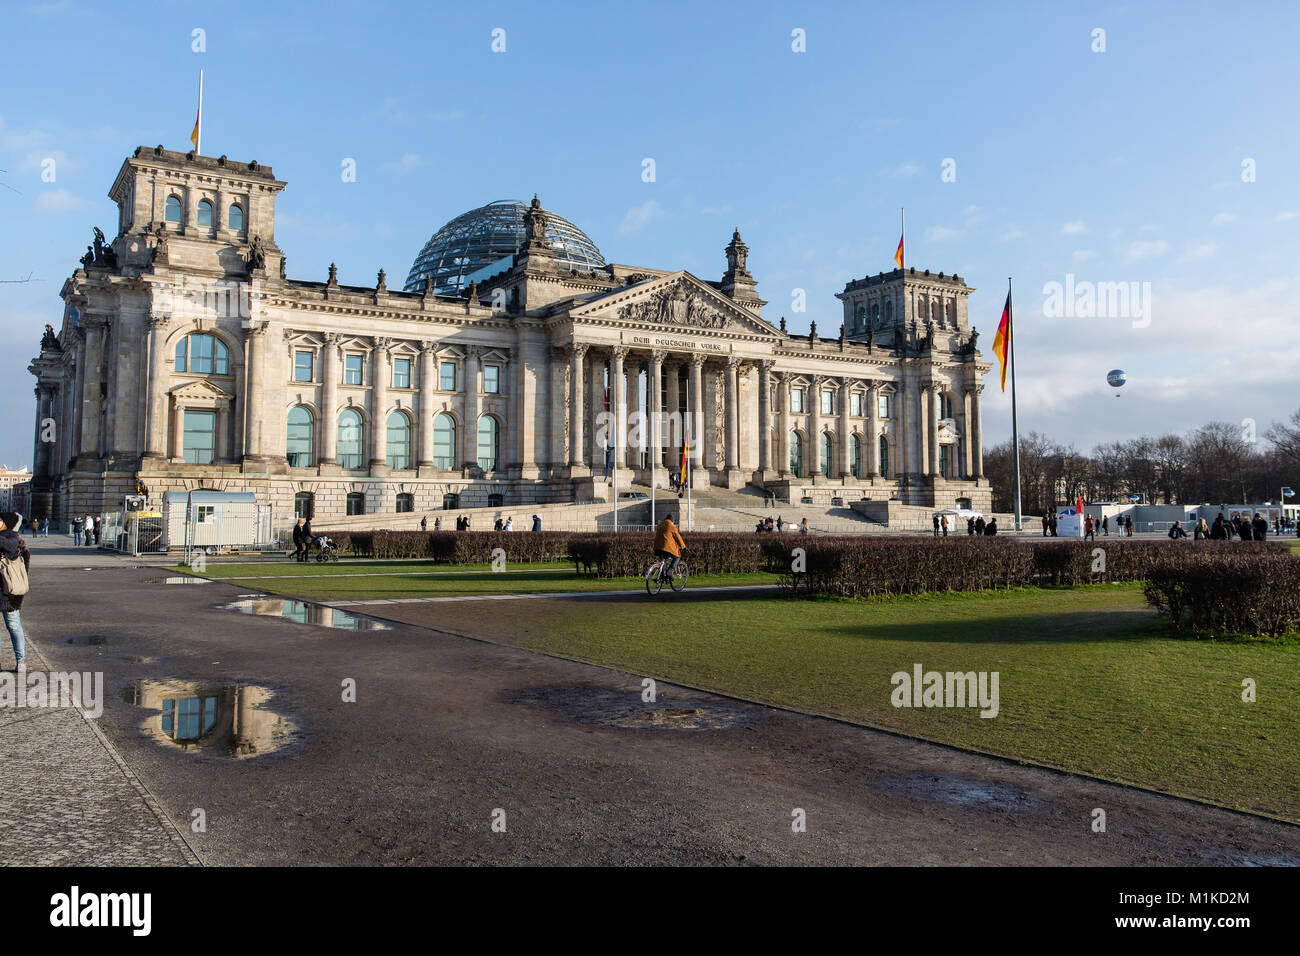 Reichstag historic building in Berlin is the meeting place of the Bundestag, the lower house of Germany’s national legislature. Blue sky Stock Photo